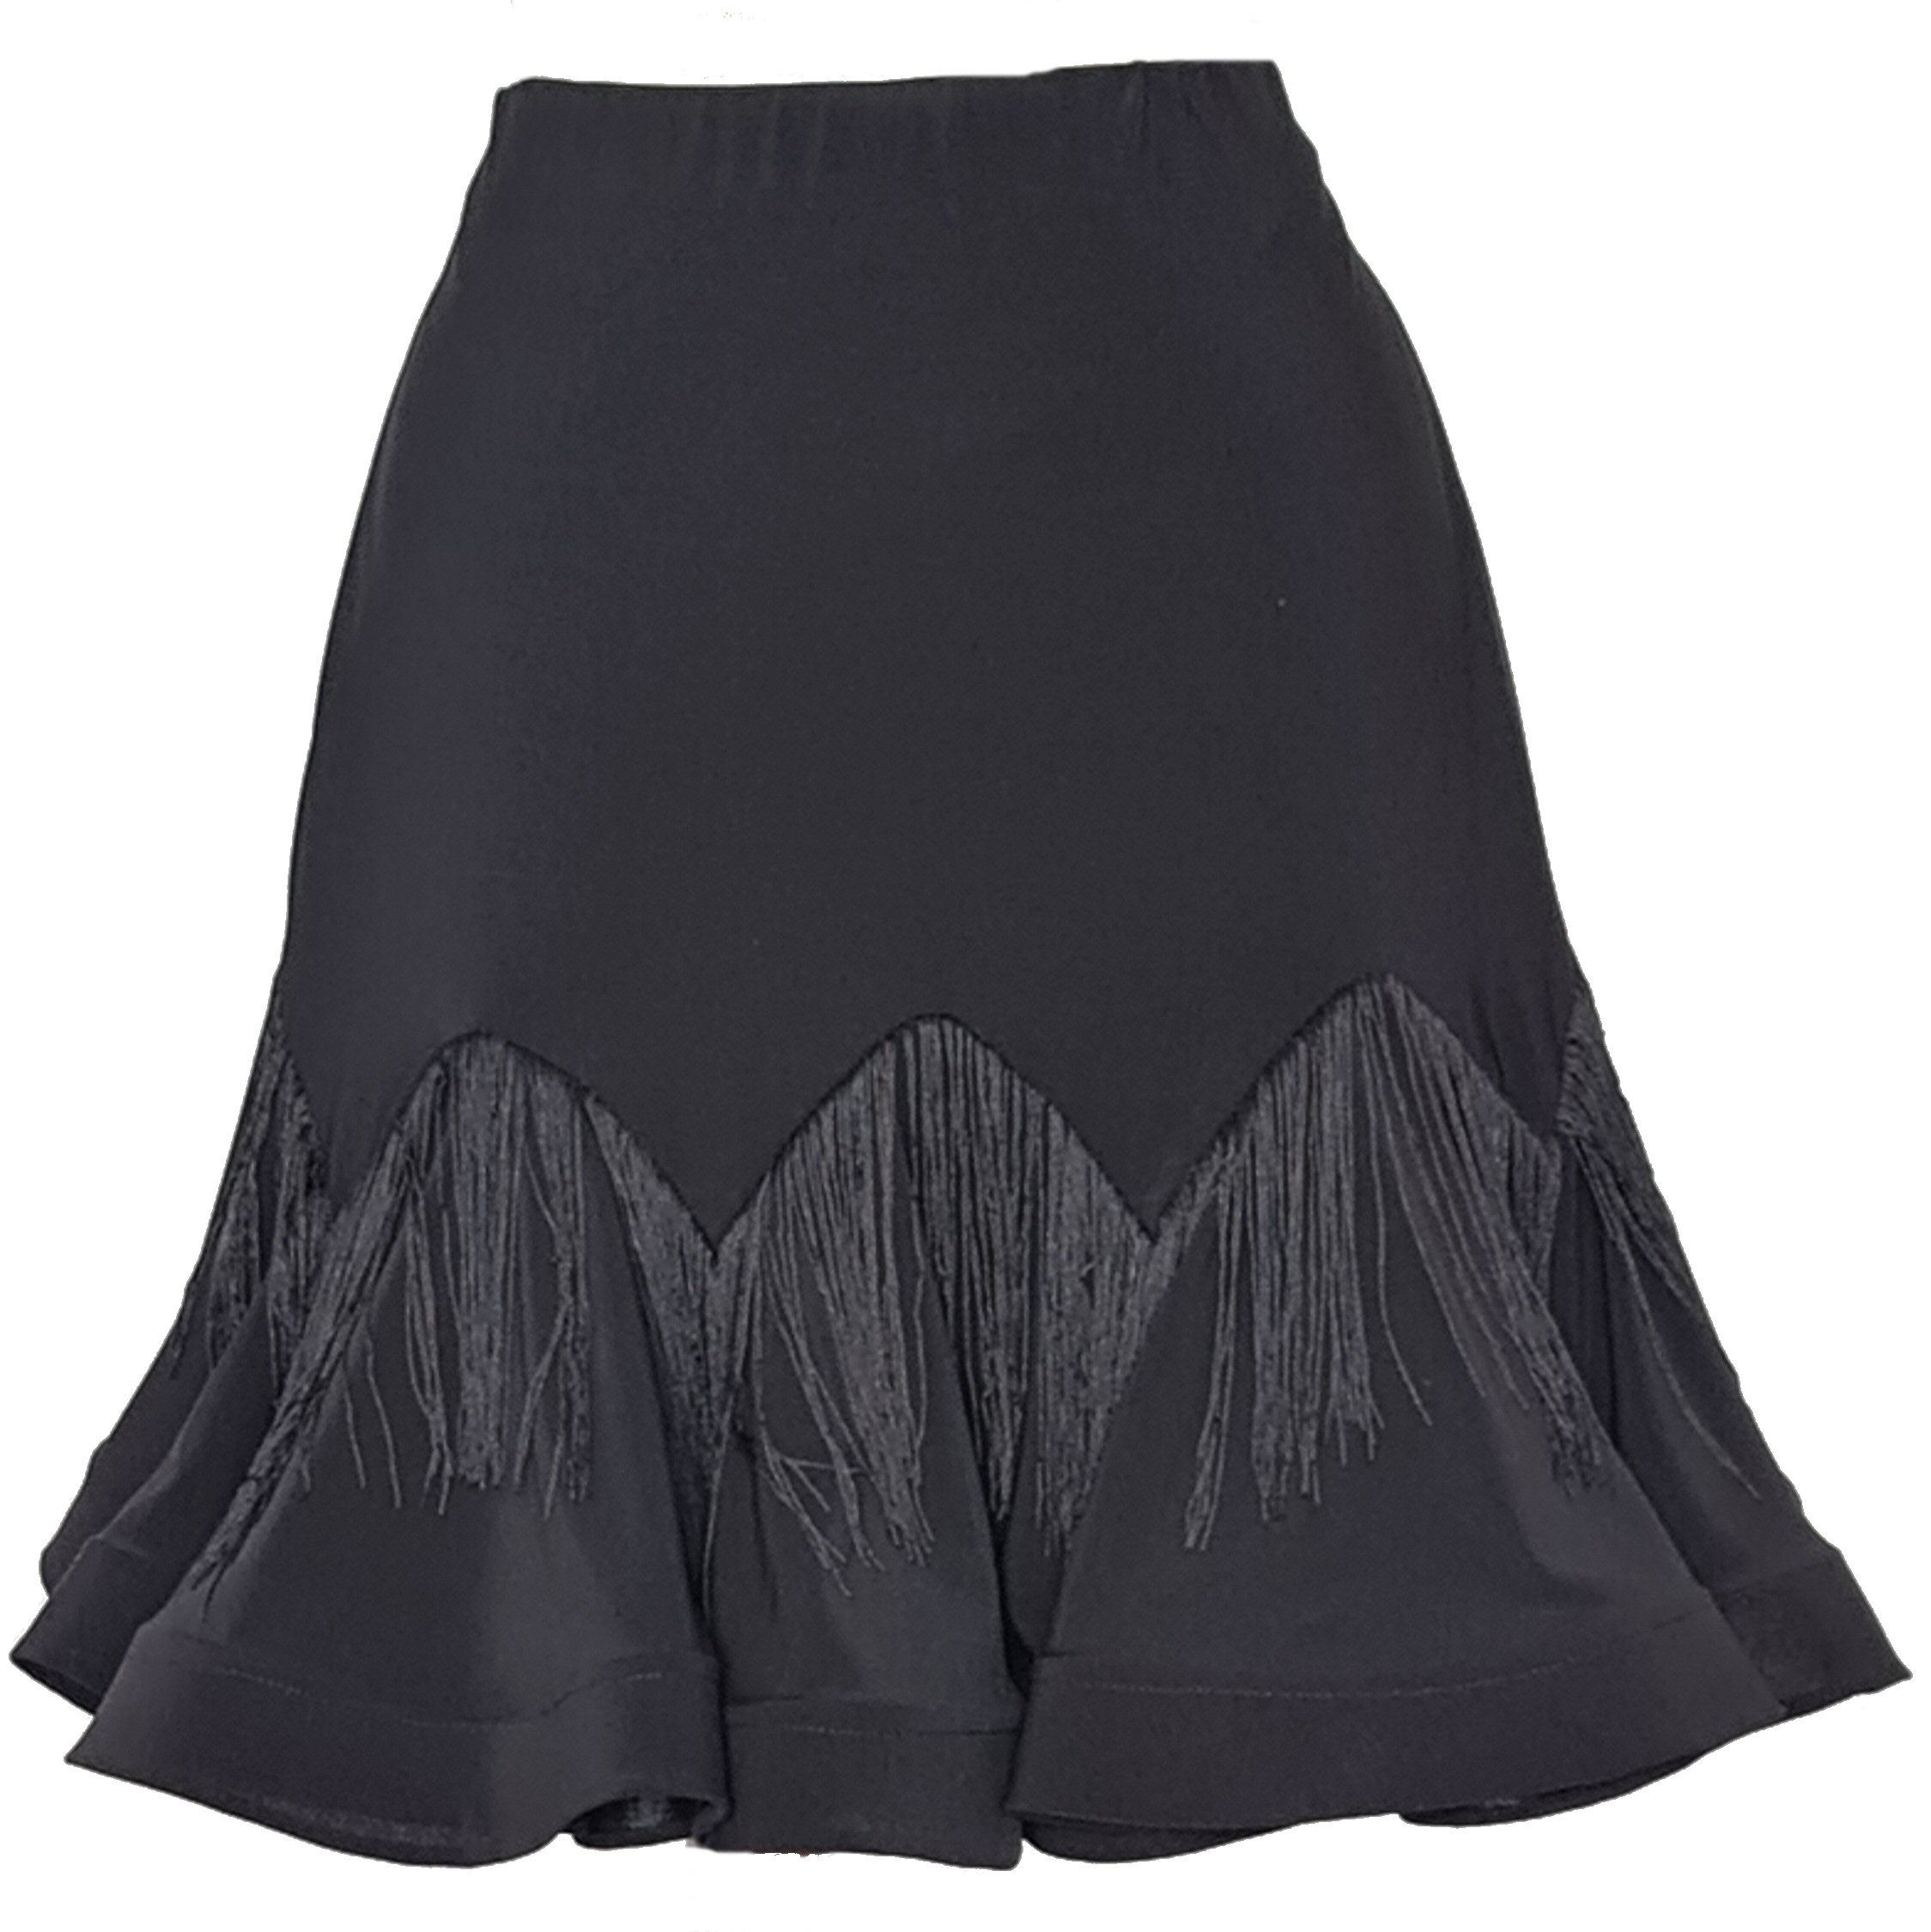 Latin skirt with circular godets and fringe